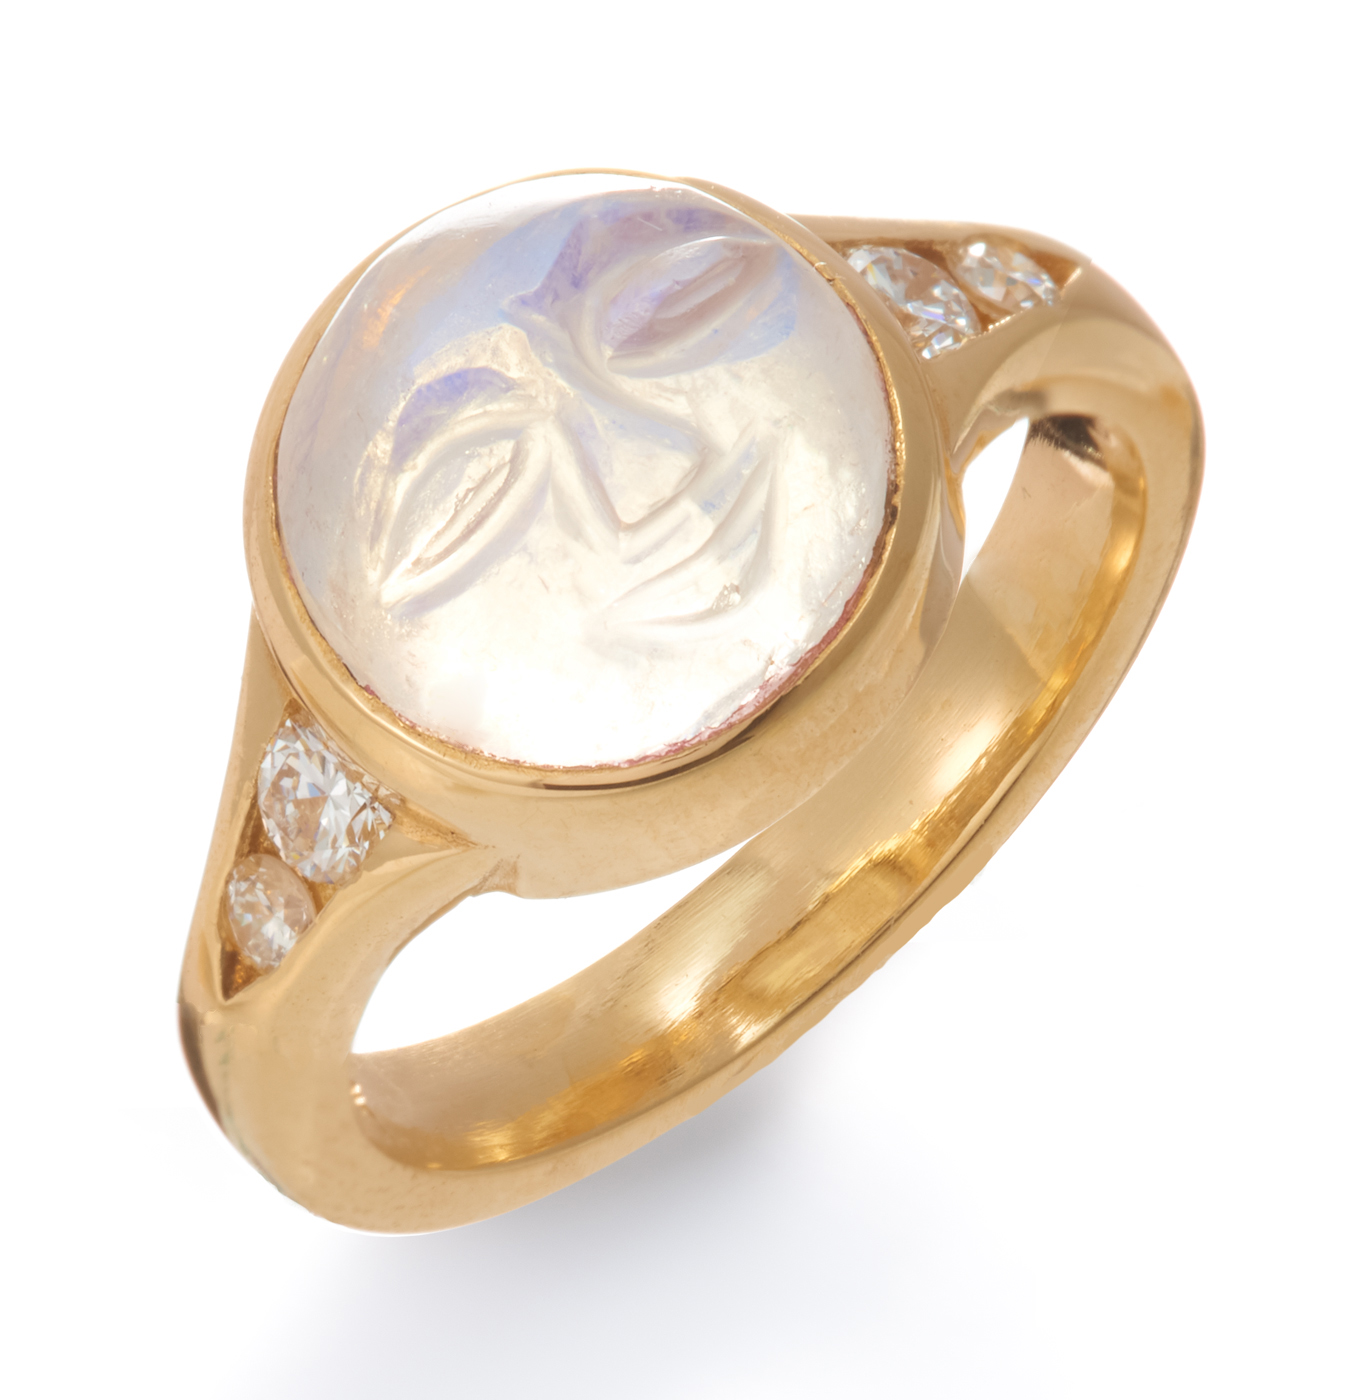 Carved Moonstone Ring